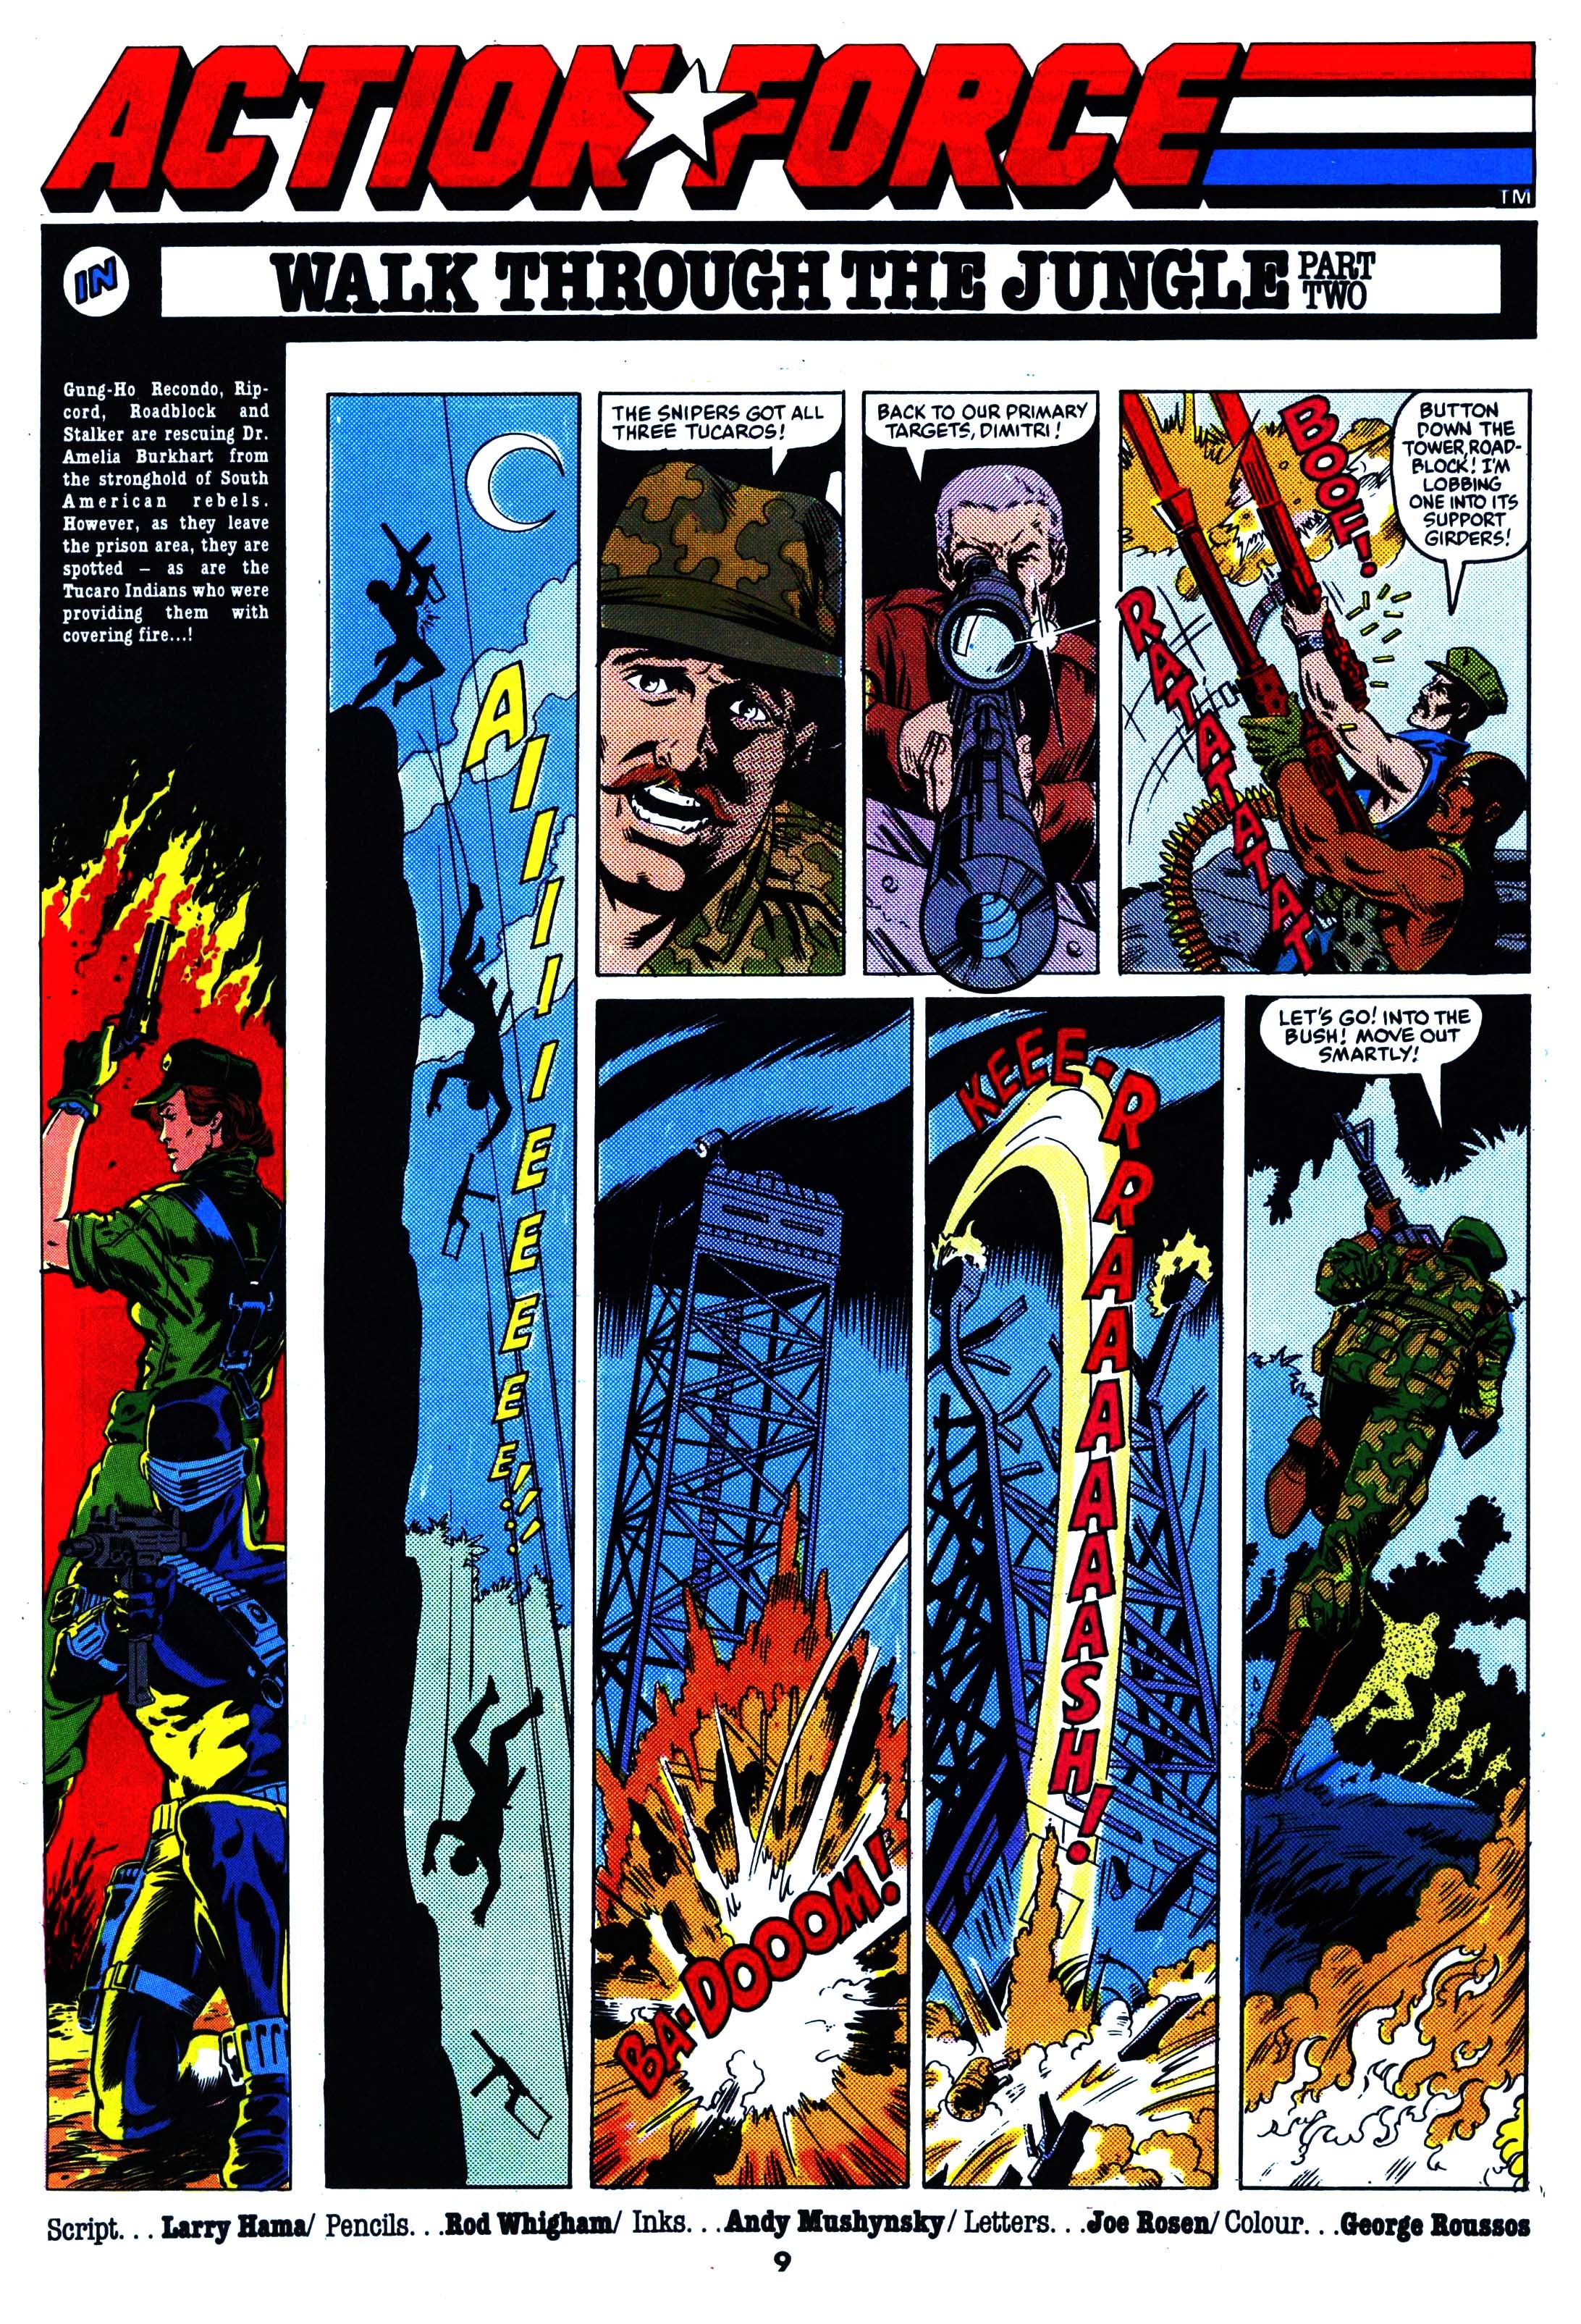 Read online Action Force comic -  Issue #36 - 9